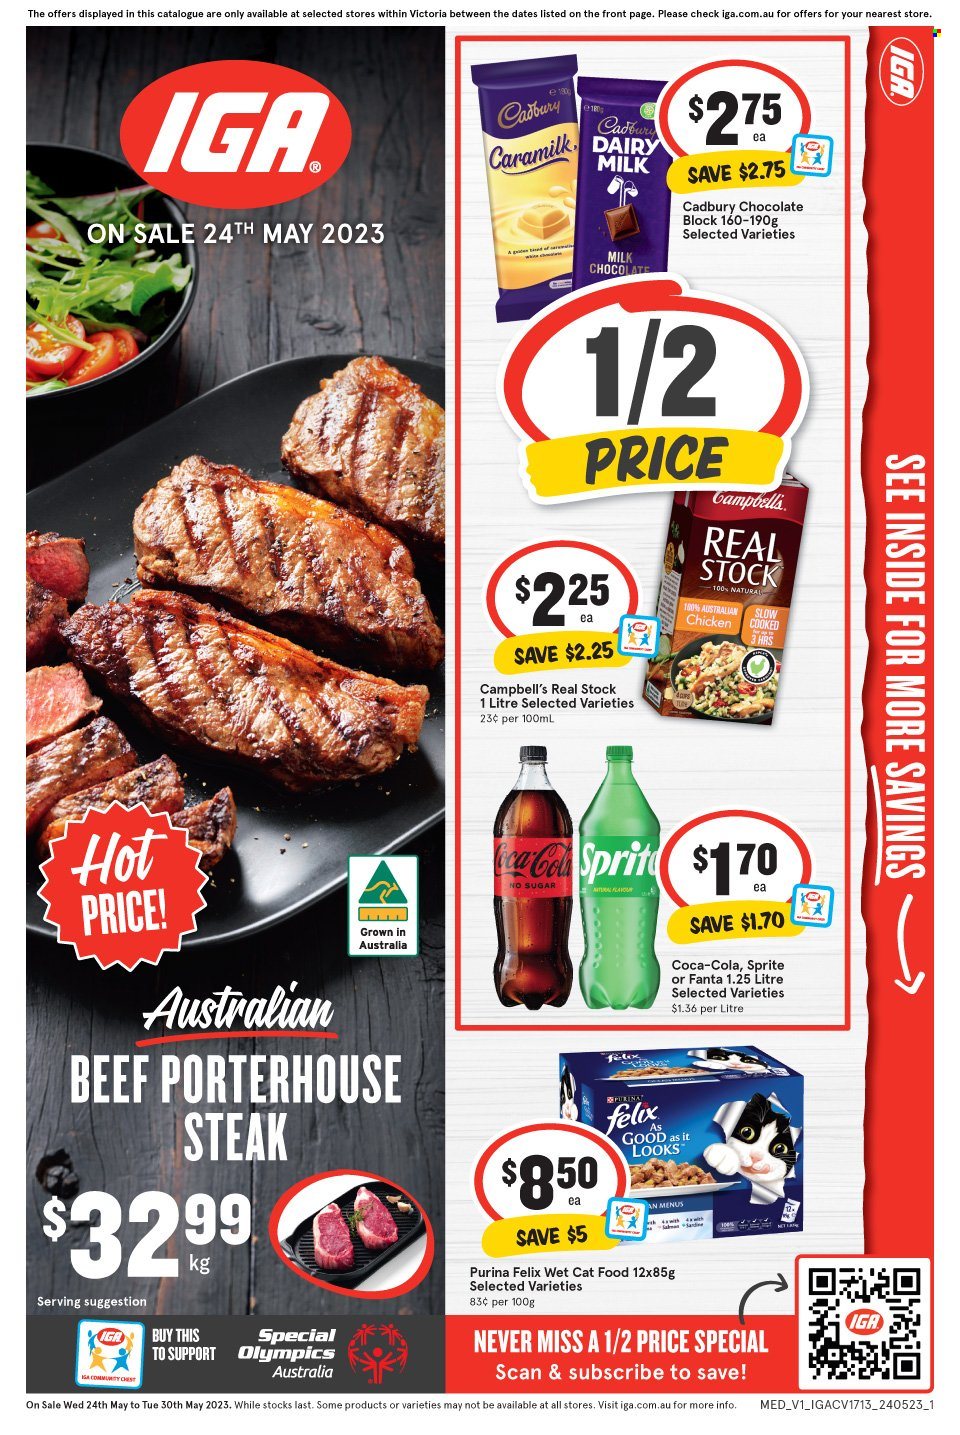 IGA Catalogue - 24 May 2023 - 30 May 2023 - Sales products - Campbell's, milk chocolate, chocolate, Cadbury, Dairy Milk, Coca-Cola, Sprite, Fanta, soft drink, chicken, steak, animal food, cat food, Purina, Felix, wet cat food. Page 1.